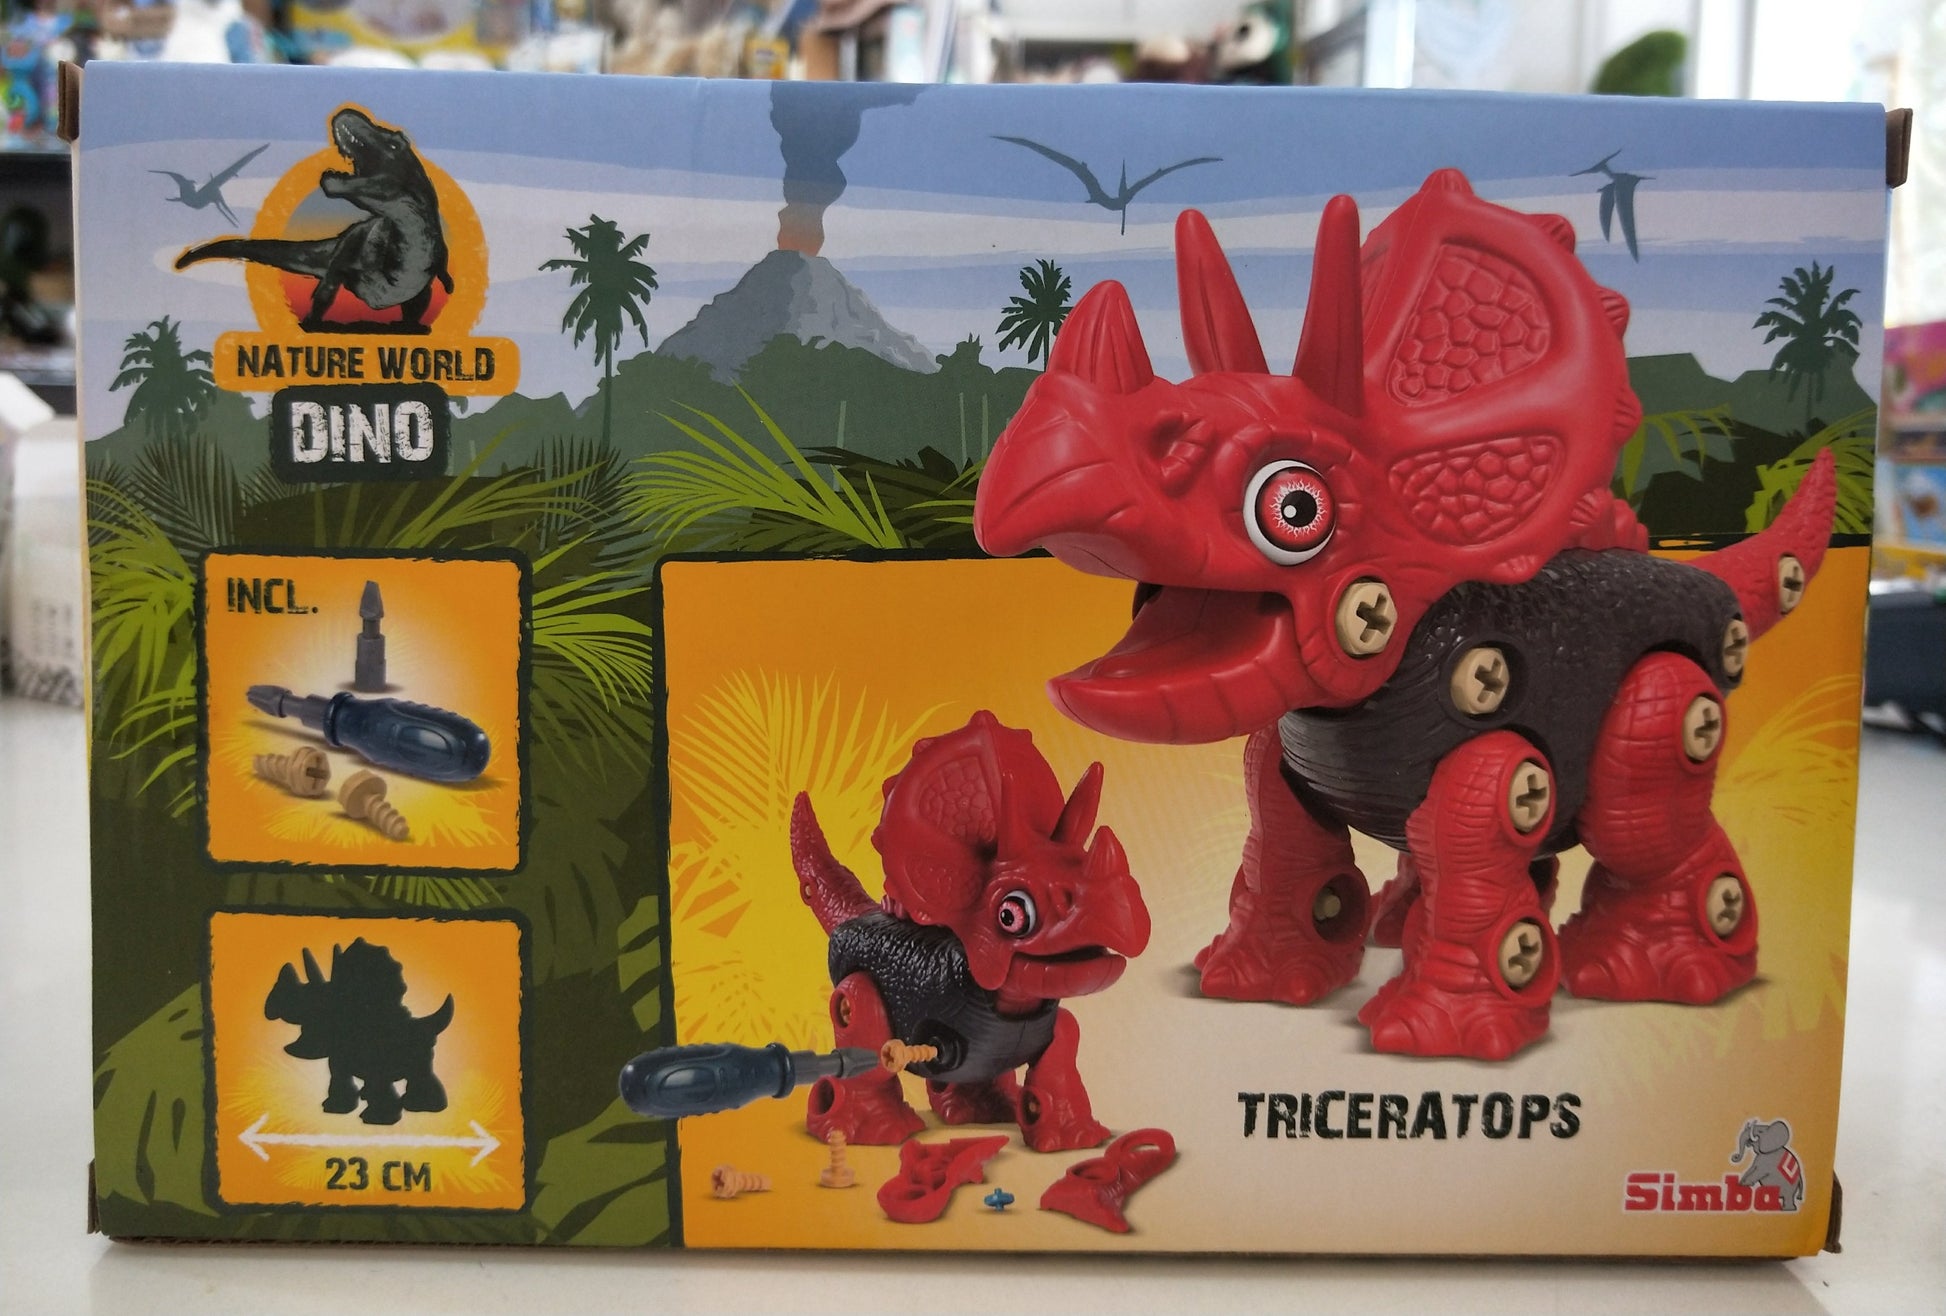 Nature World build a Triceratops